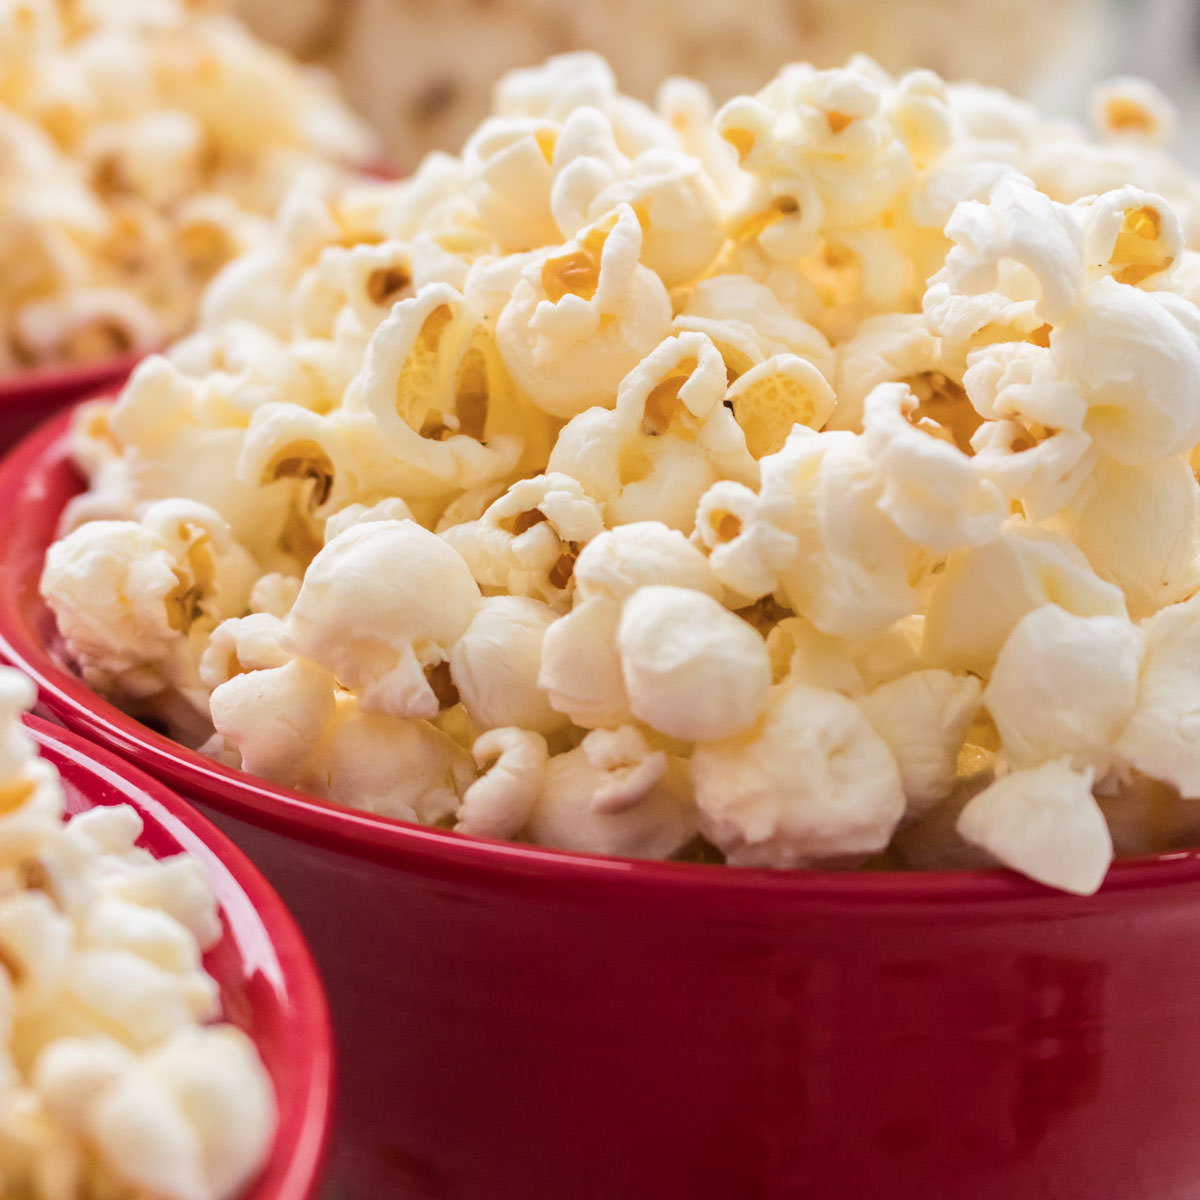 https://www.twosisterscrafting.com/wp-content/uploads/2016/01/perfect-stovetop-popcorn-1200-featured.jpg